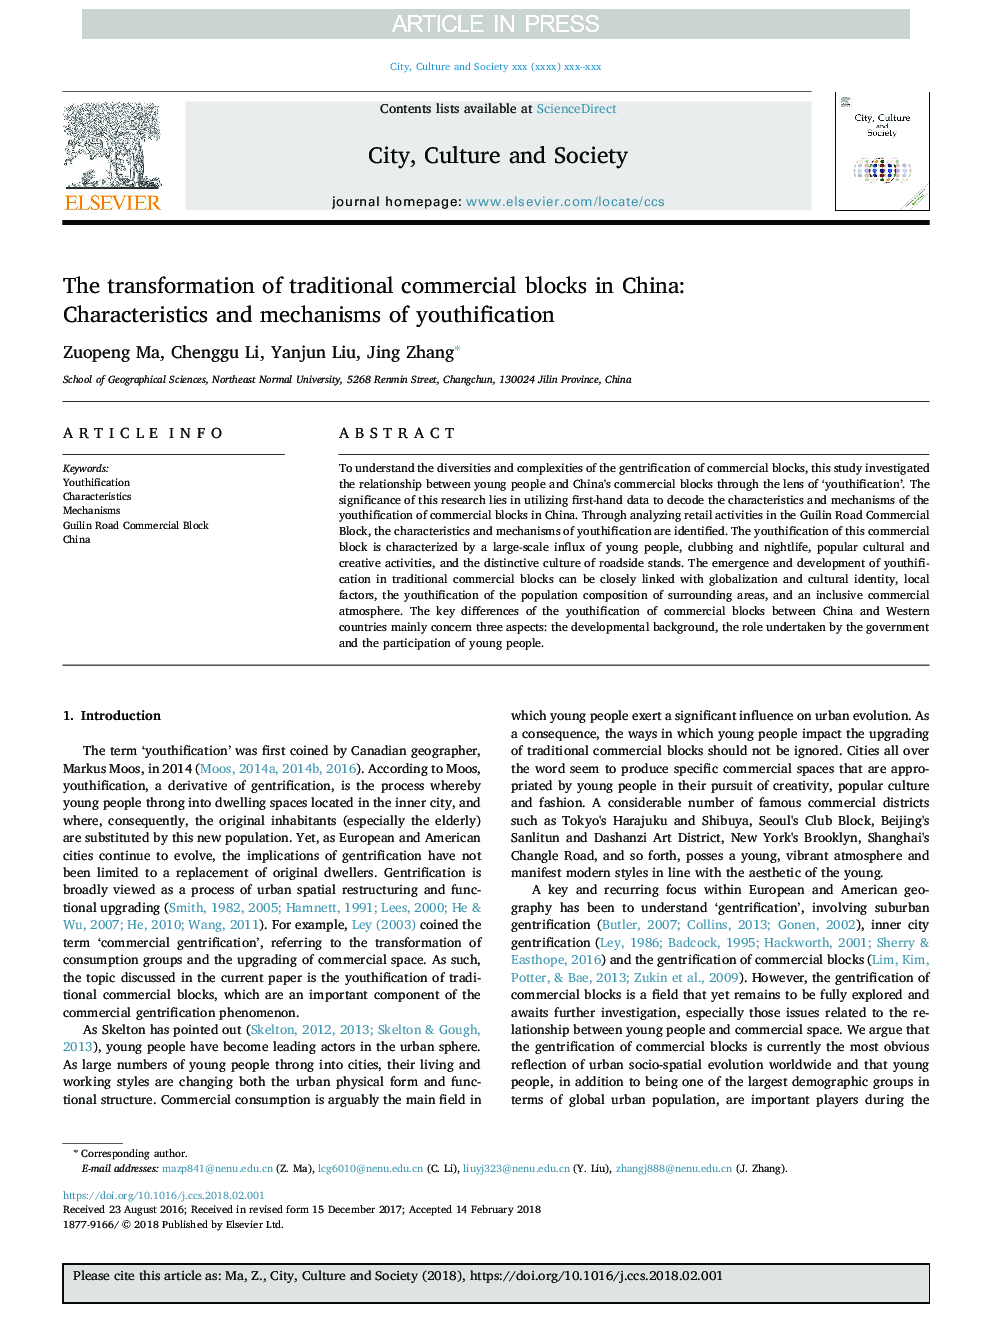 The transformation of traditional commercial blocks in China: Characteristics and mechanisms of youthification